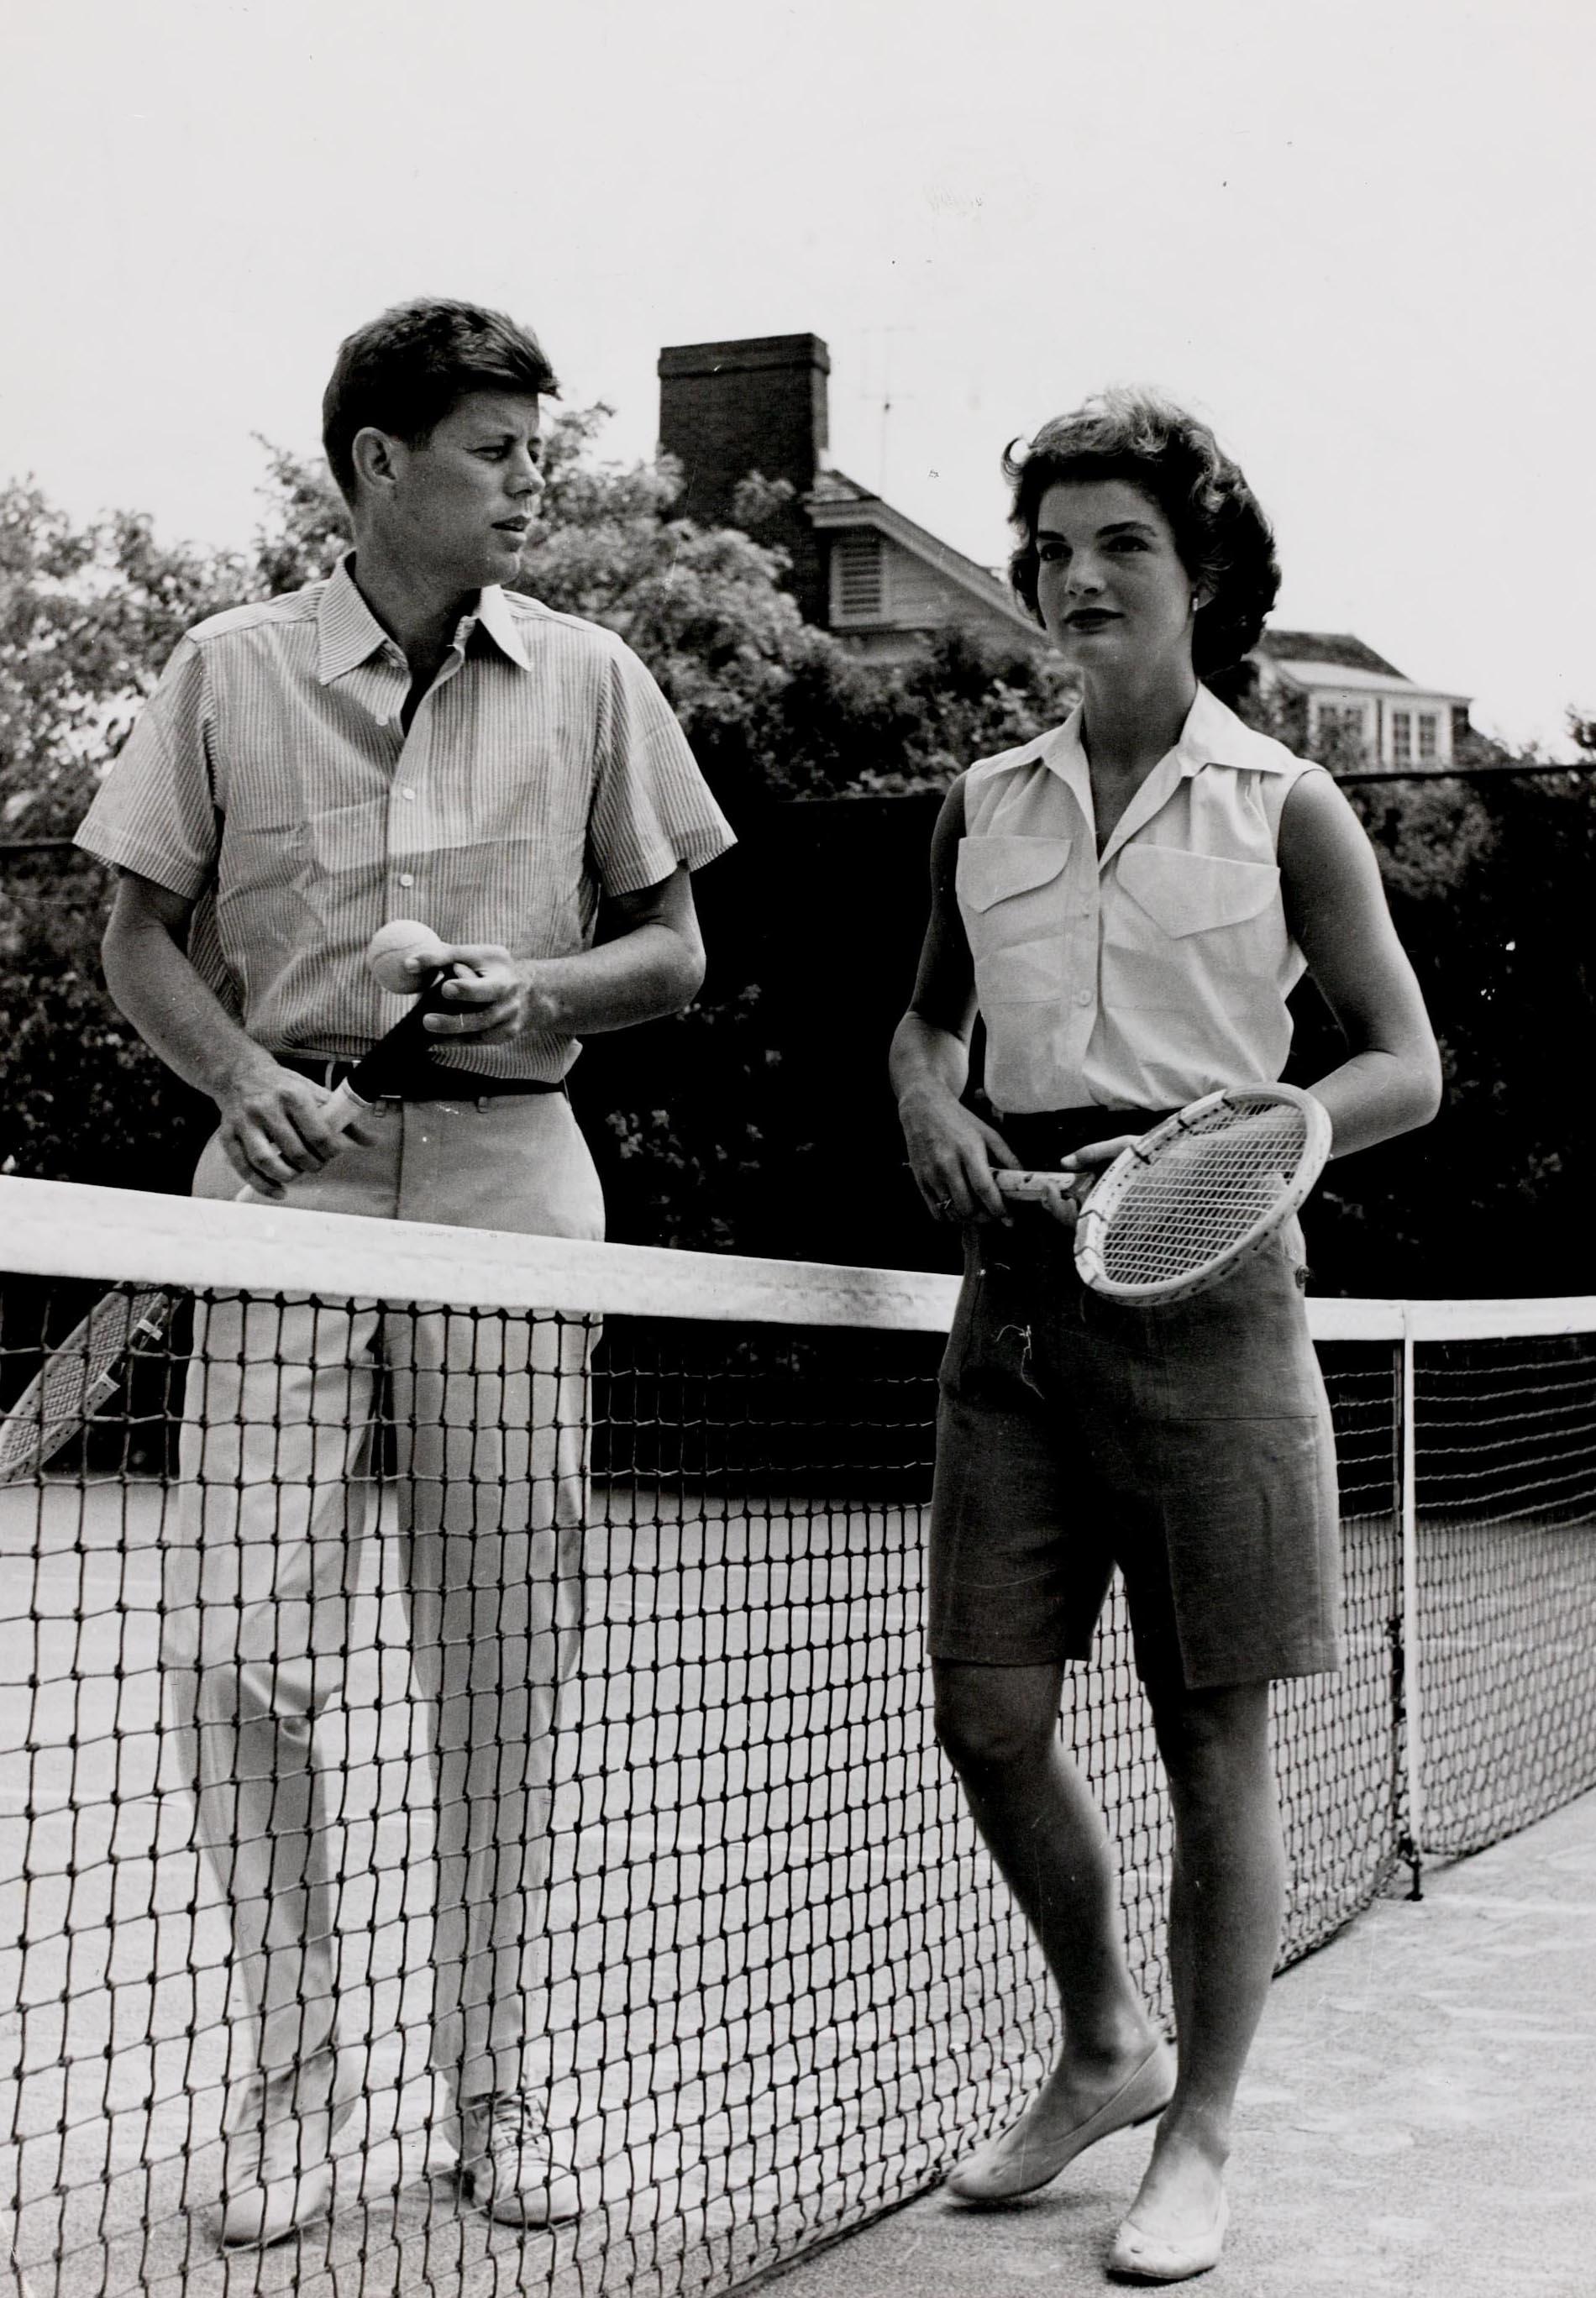 Popperfoto The Book. Volume 1. Page: 77. Picture:14. Circa 1953. A picture of John and Jacqueline Kennedy playing tennis. The couple were married in 1953, he going on to become President of the U.S.A. while she became a star in her own right.